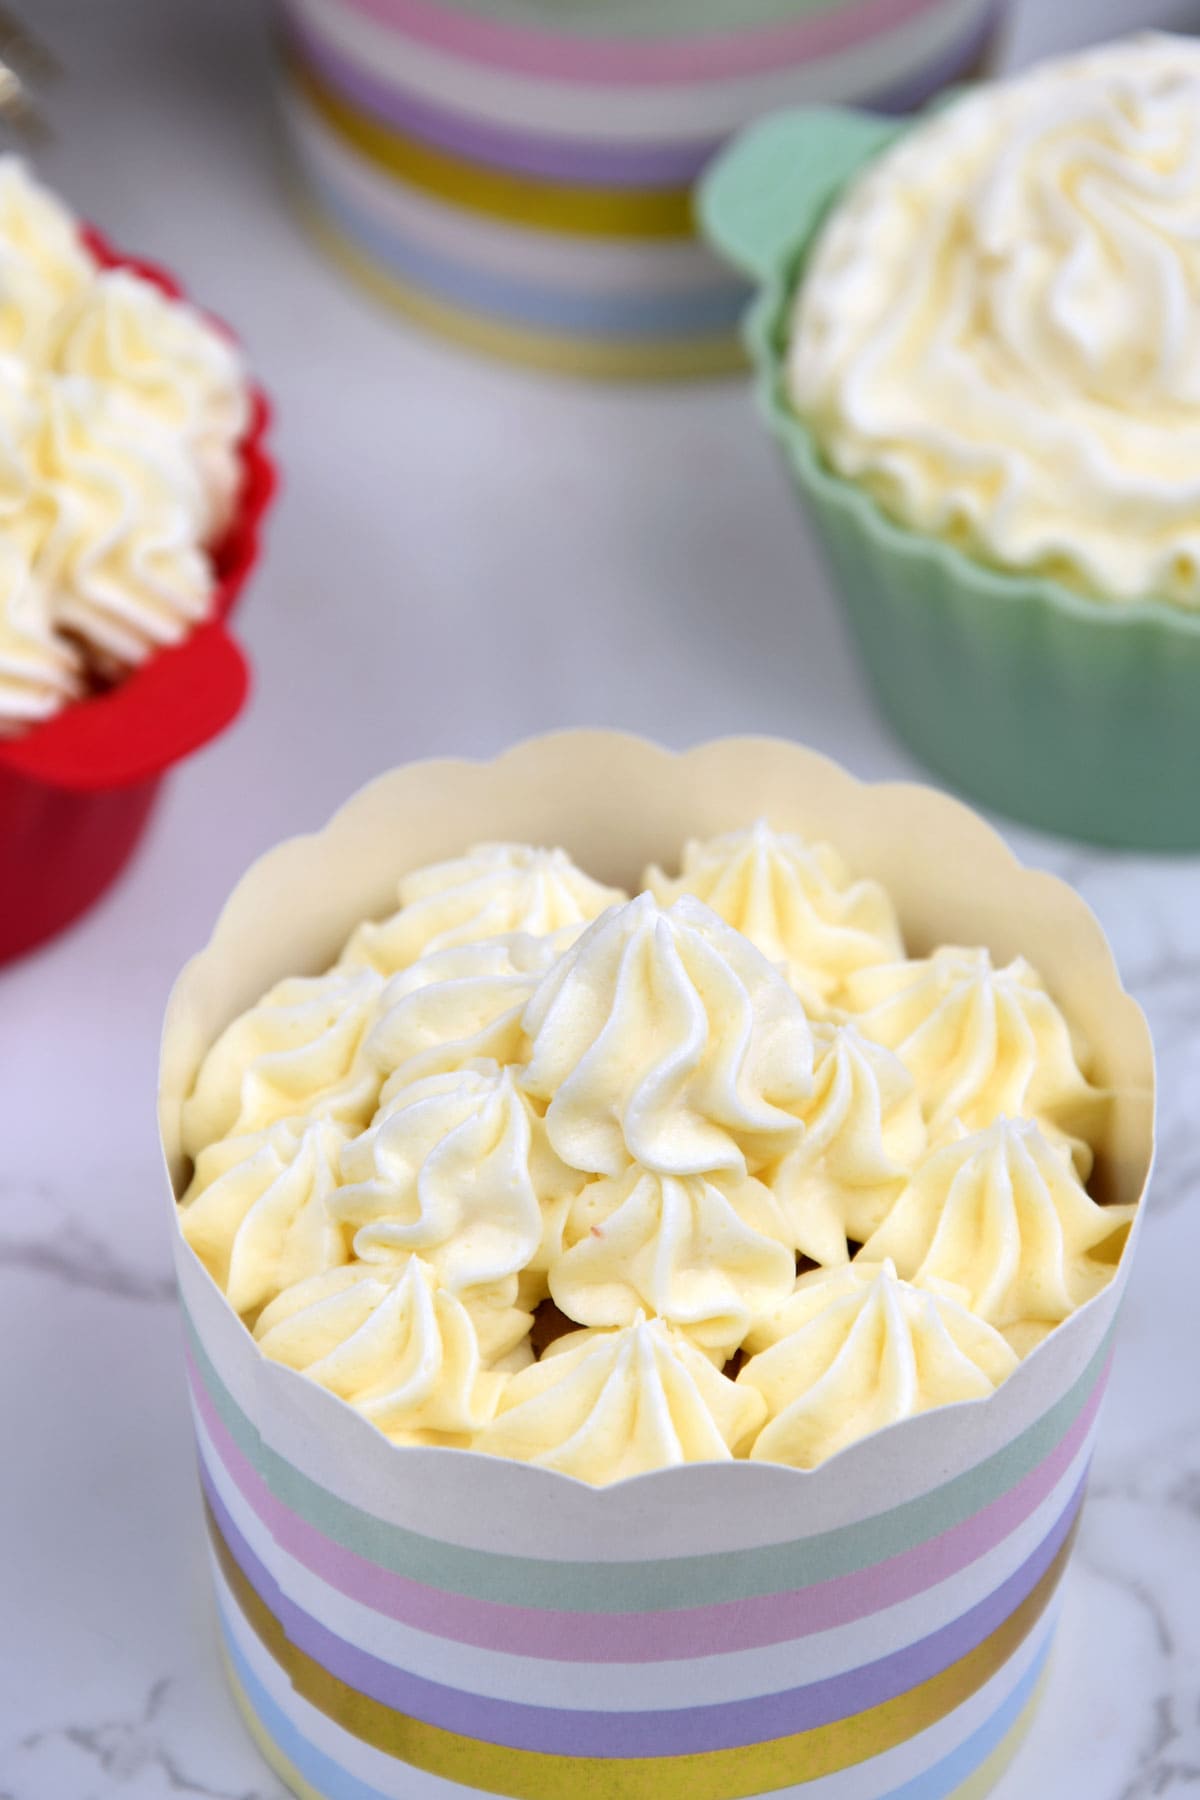 Butter cream frosting topping on a vanilla cupcake.